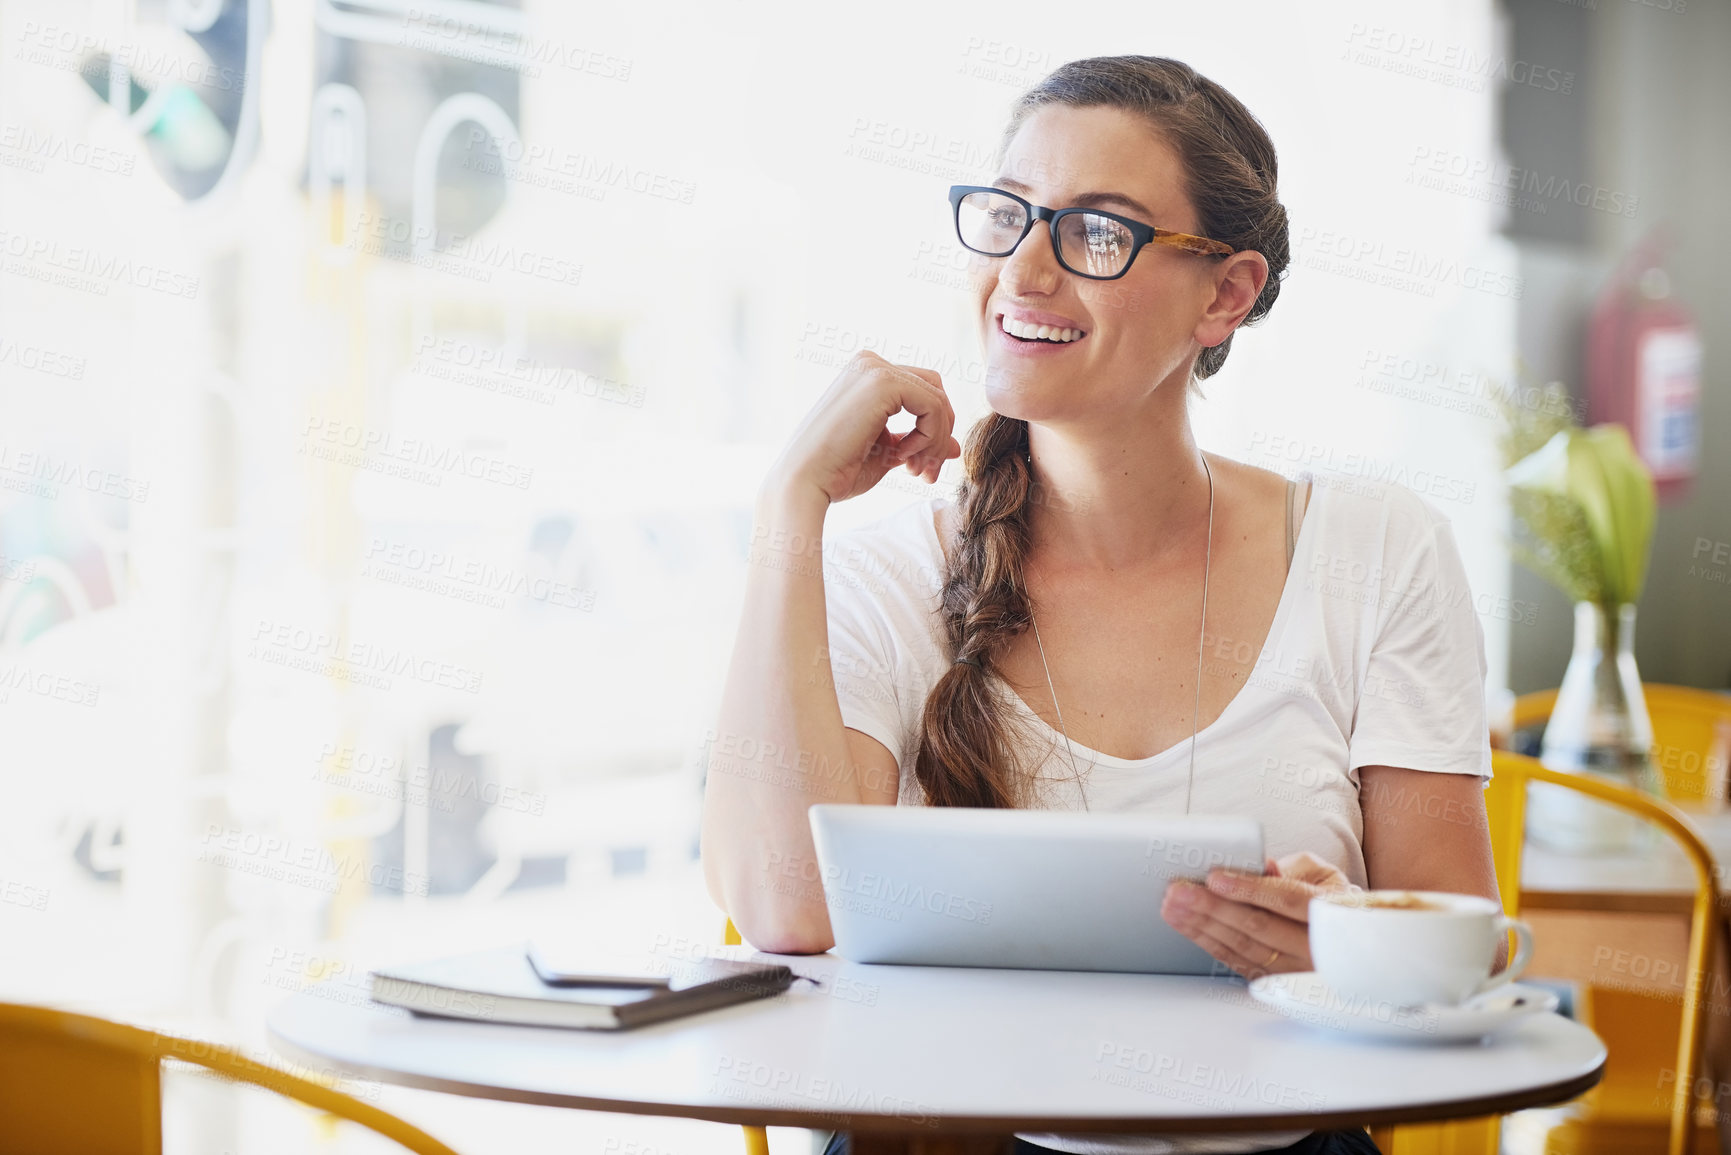 Buy stock photo Shot of a relaxed young woman using her tablet while drinking coffee at her favorite cafe